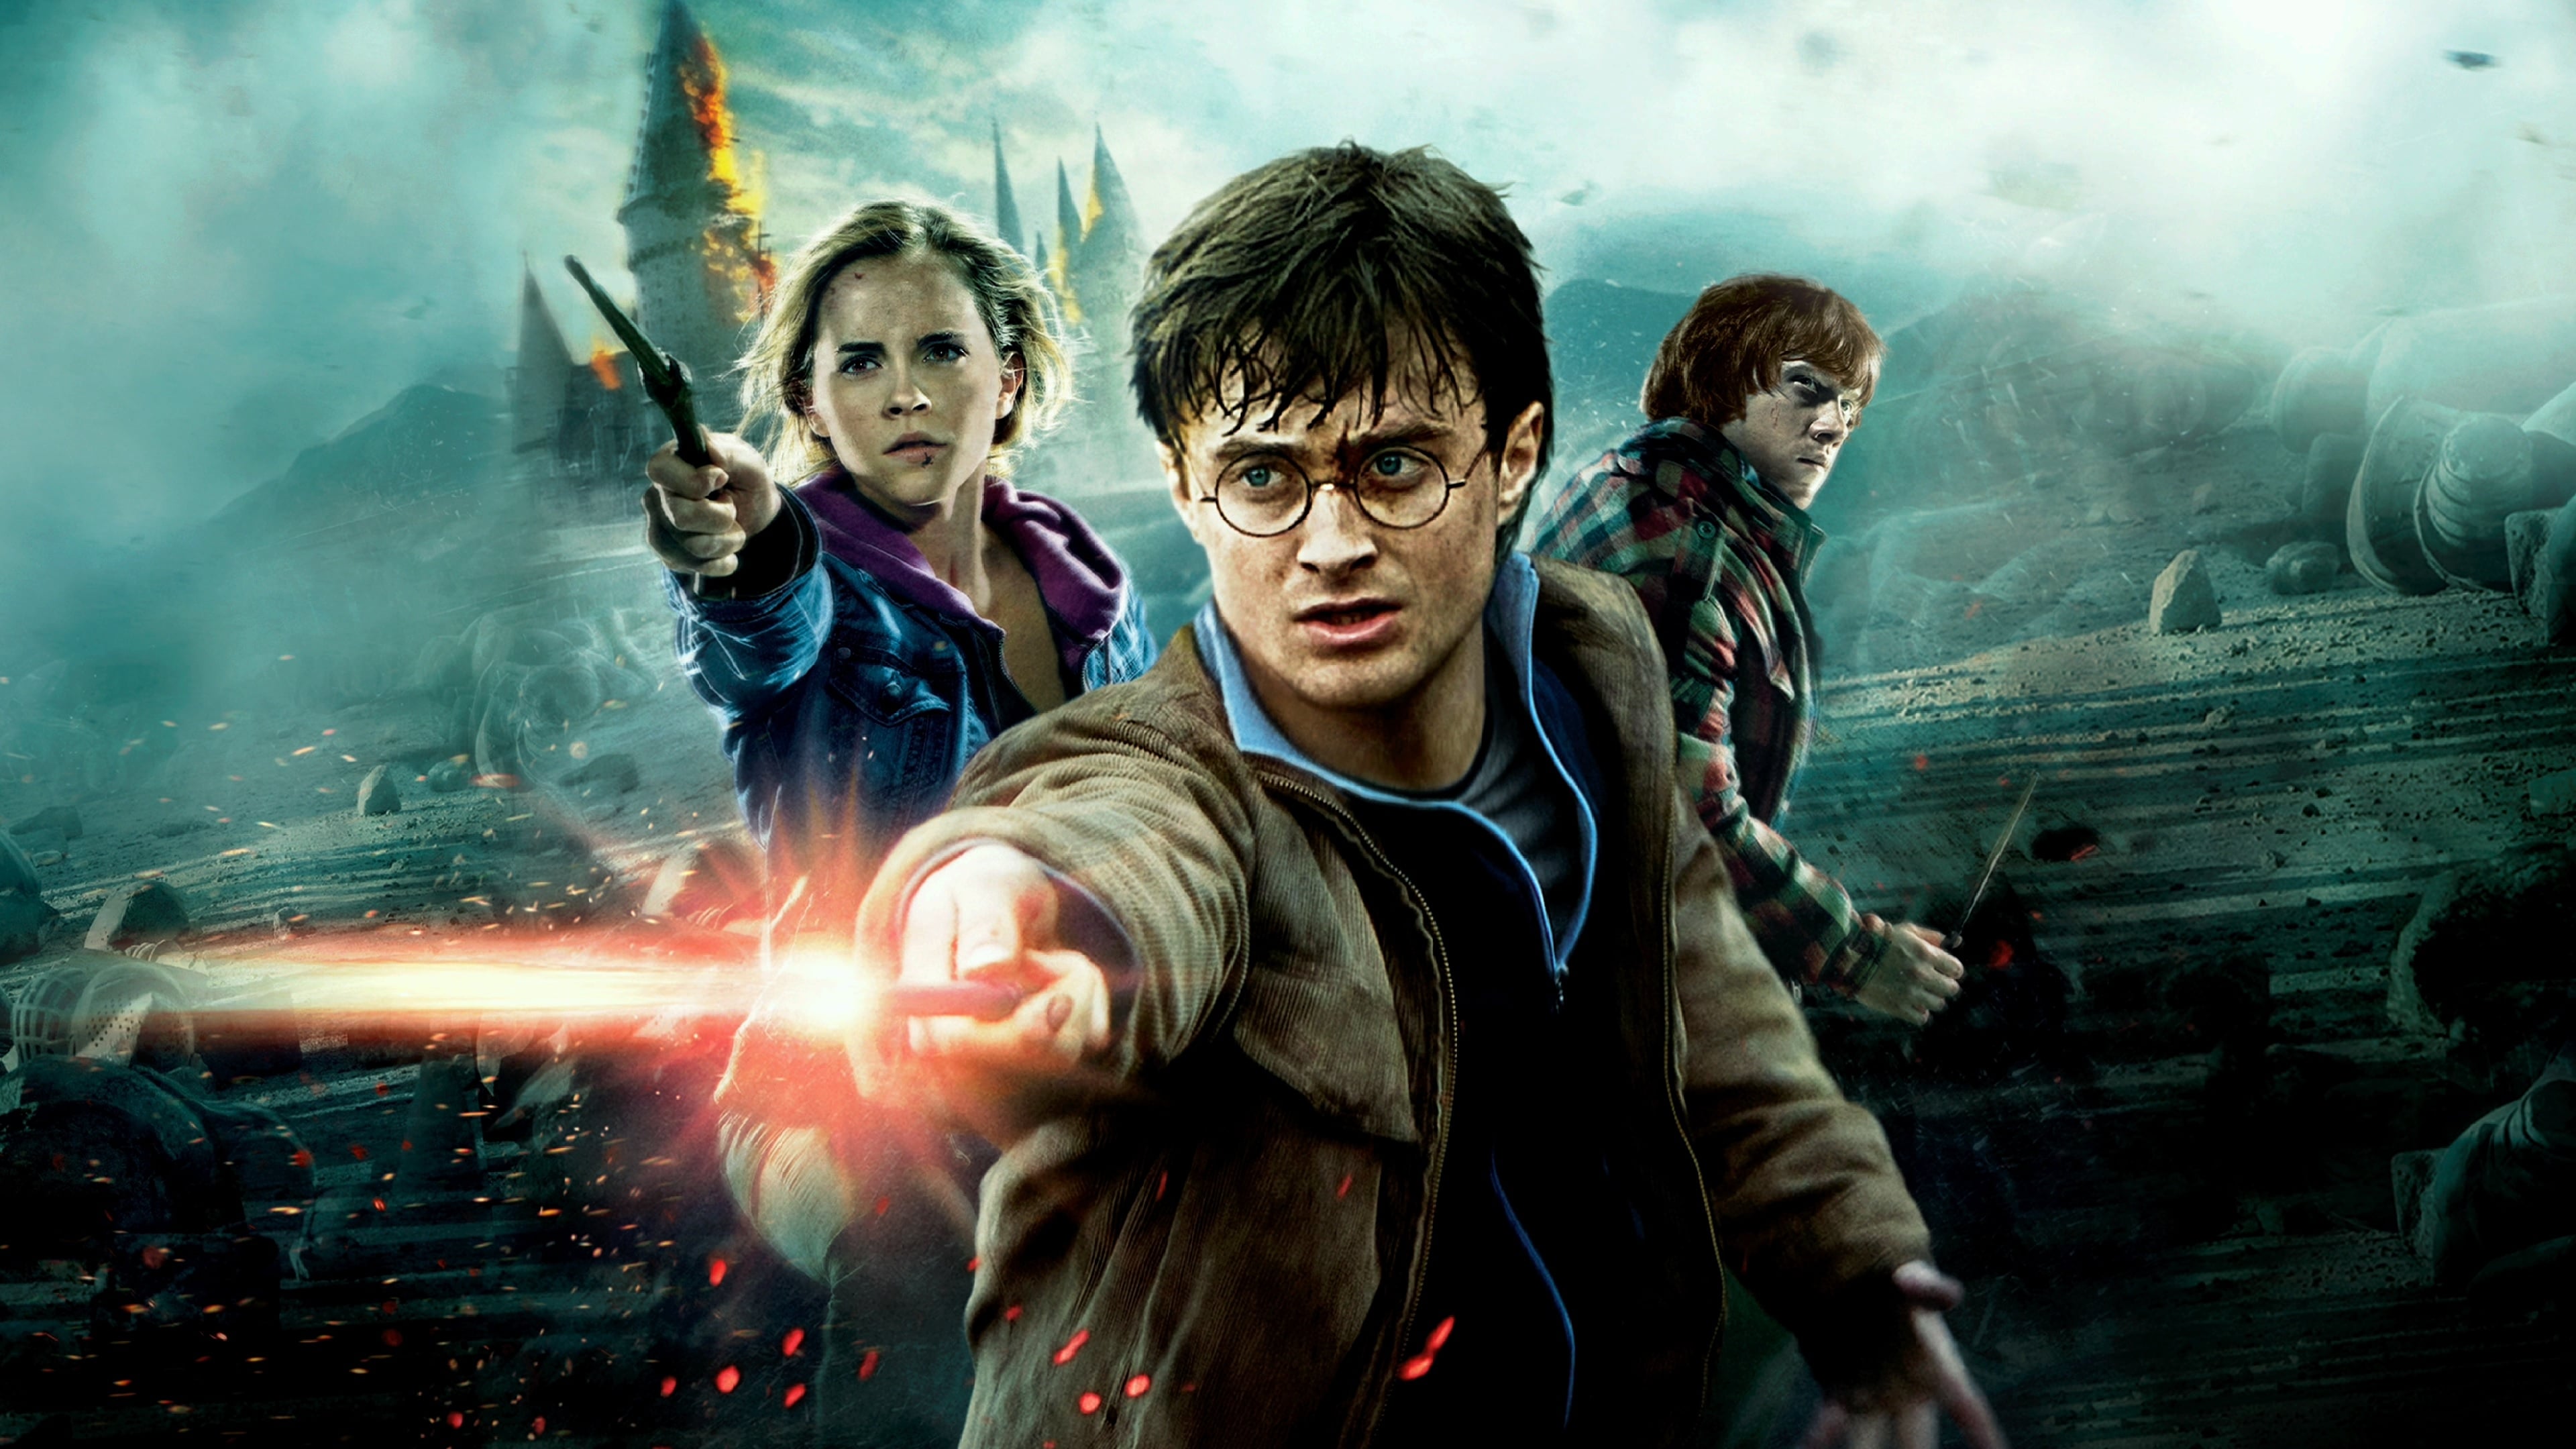 Harry Potter and the Deathly Hallows: Part 2 4k Ultra HD Wallpaper